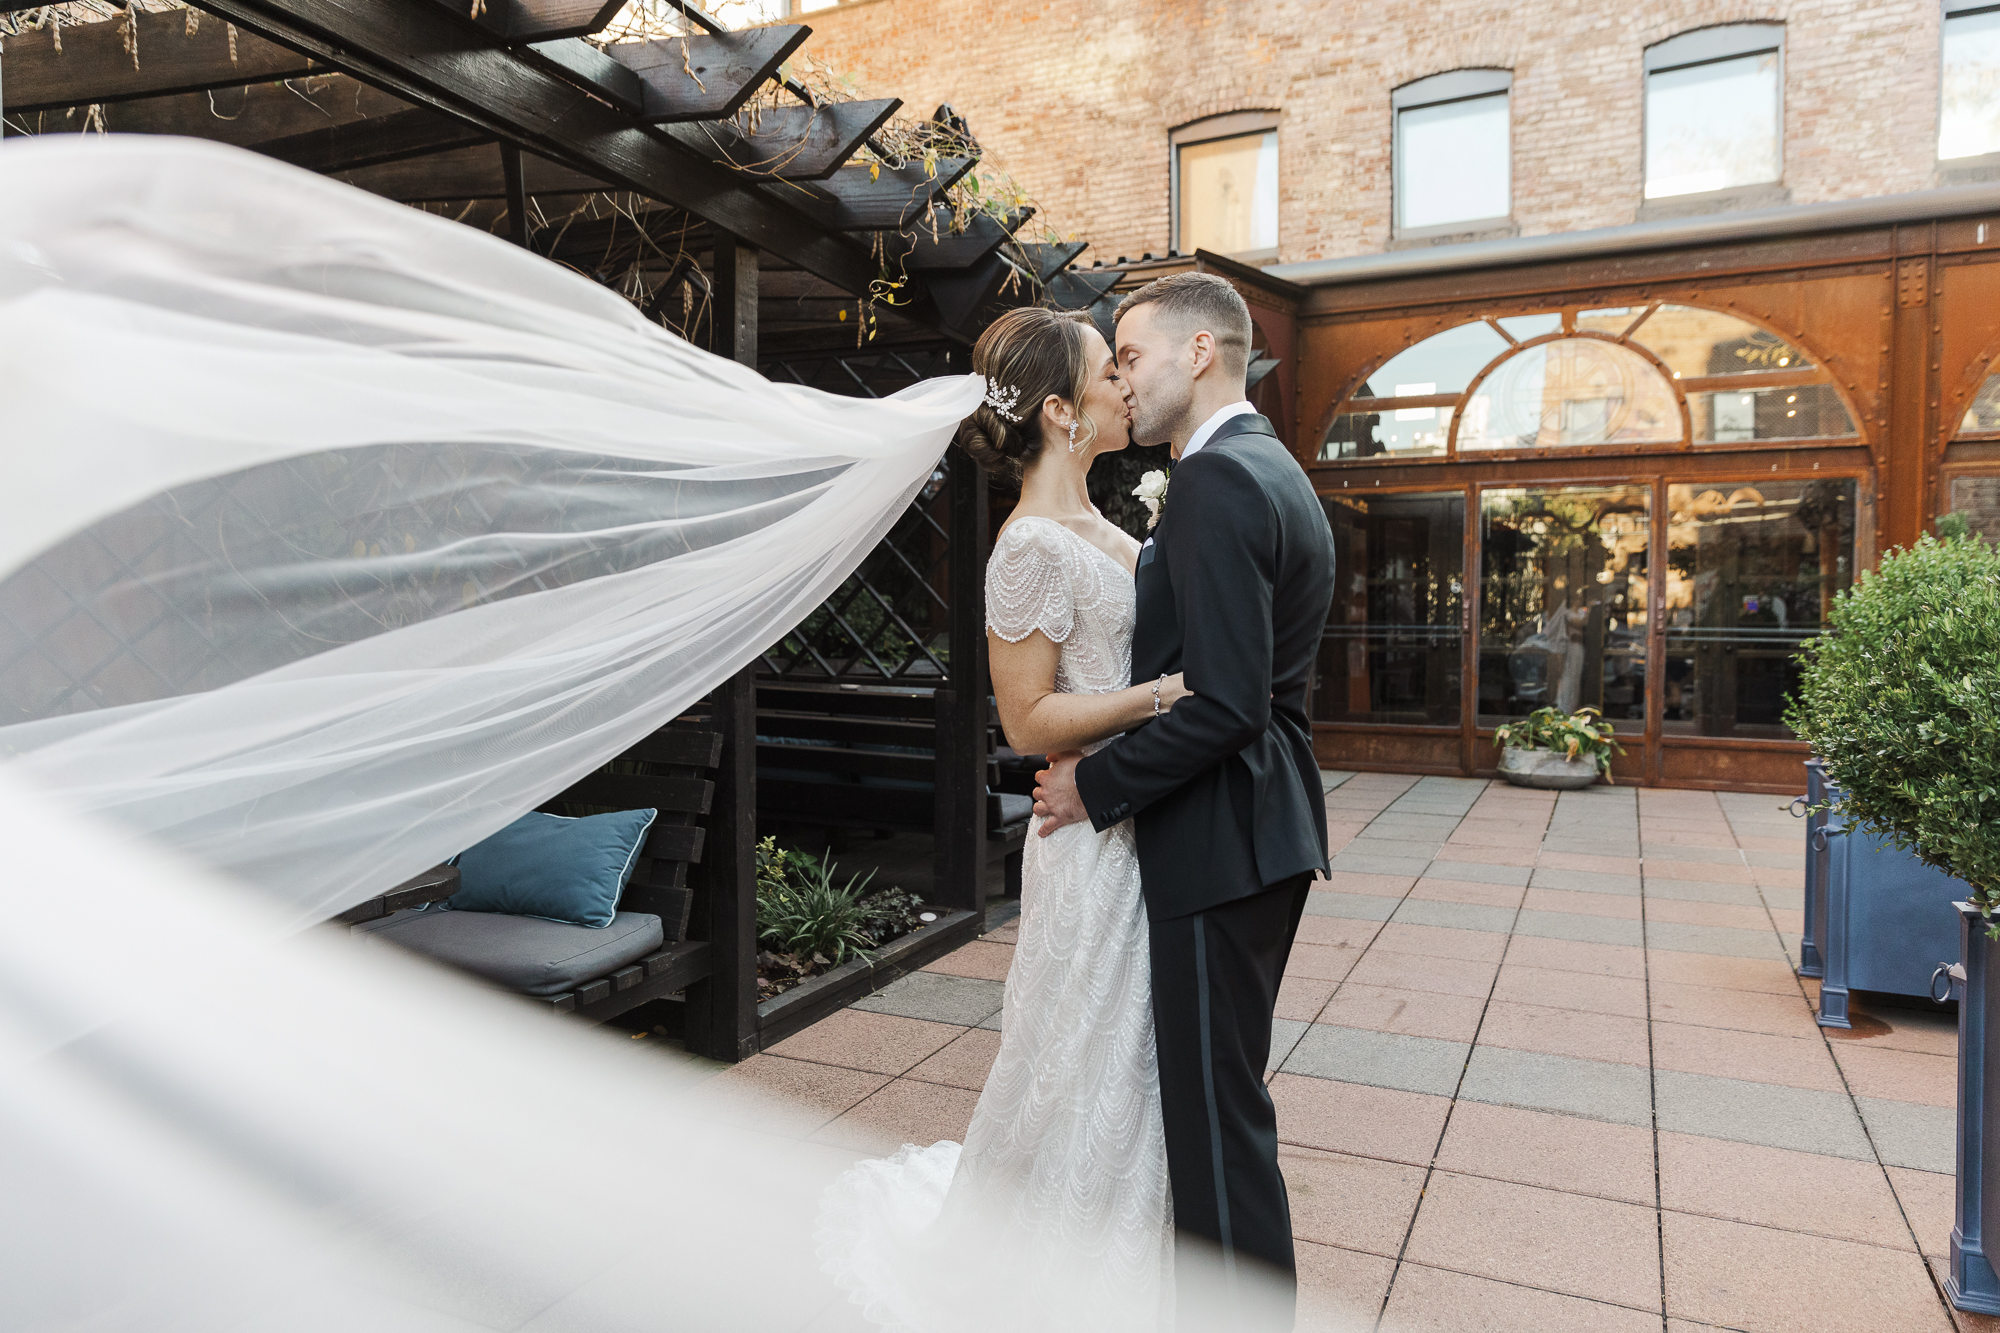 Lovely MyMoon Wedding Gallery throughout Williamsburg